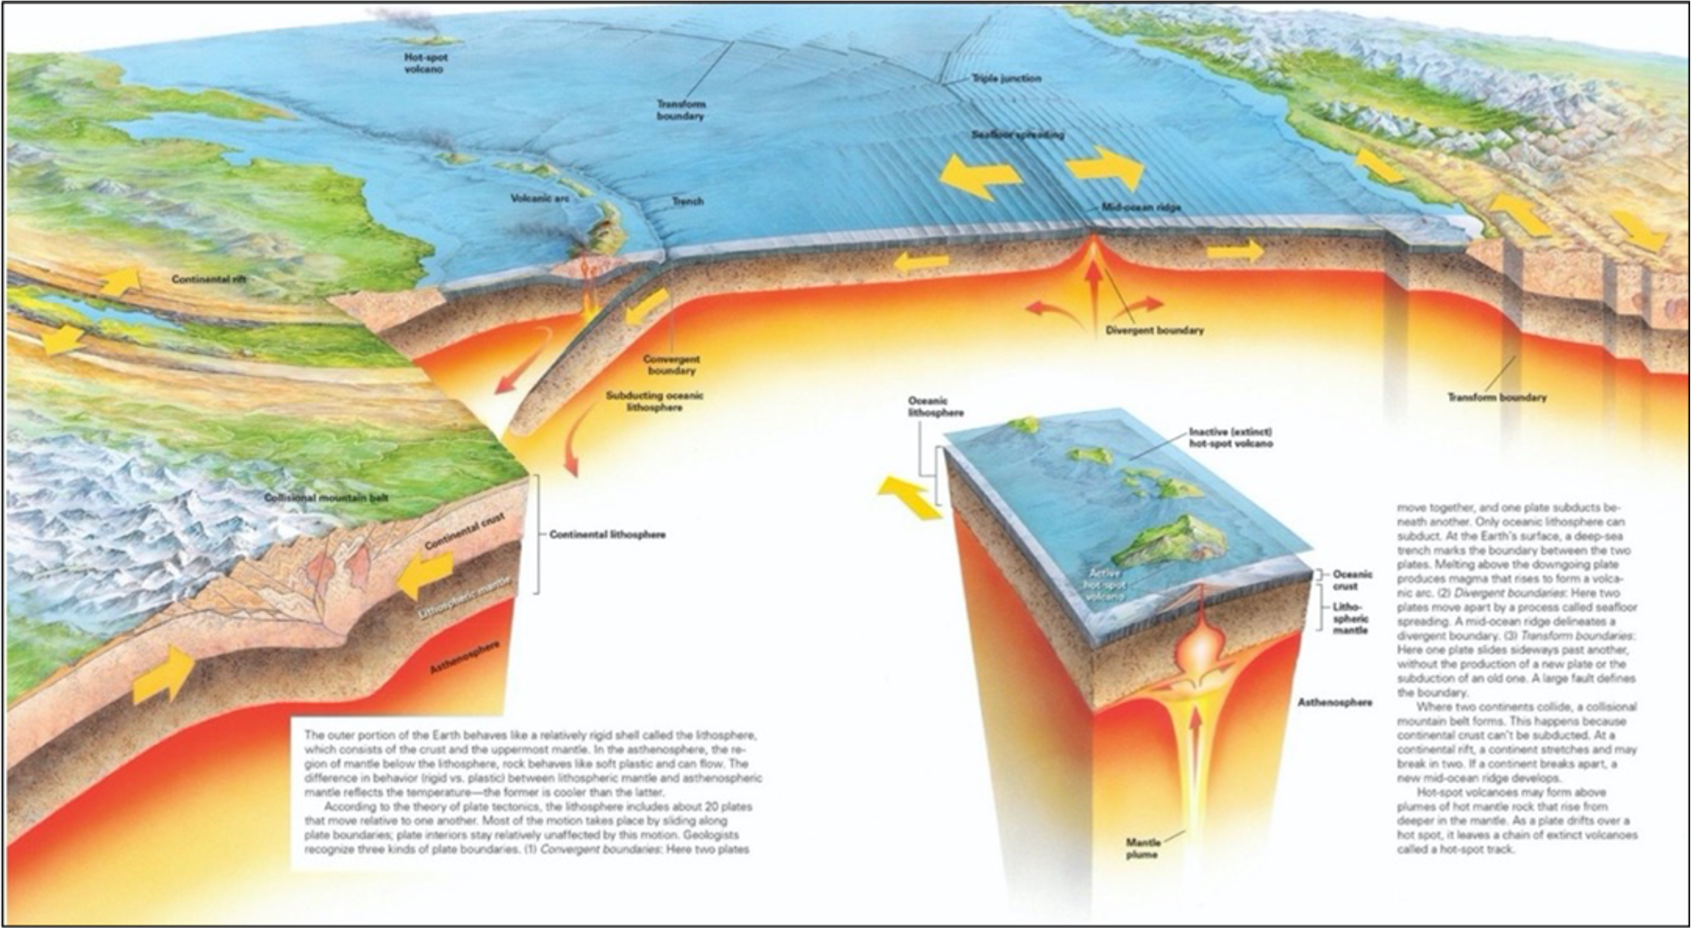 Plate Tectonics Overview.png